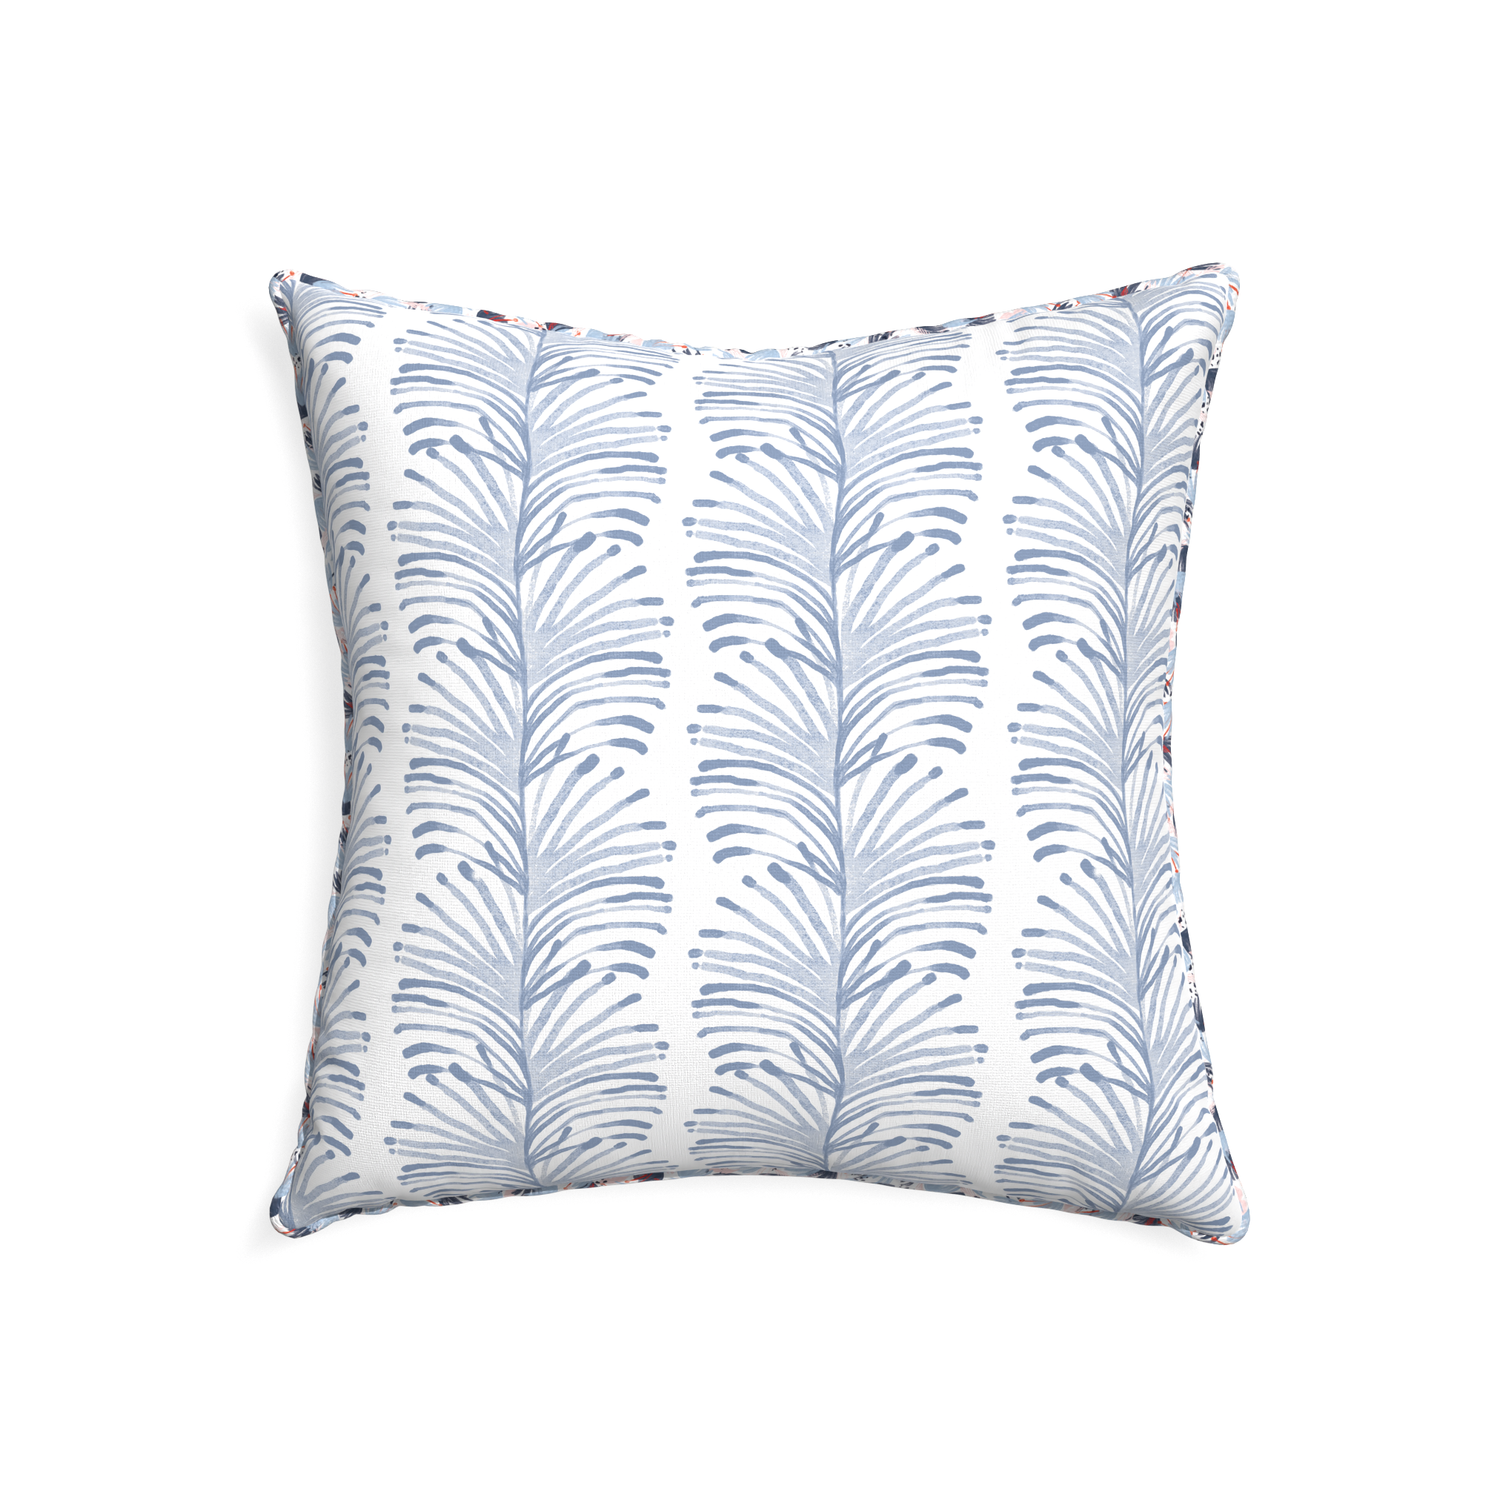 22-square emma sky custom pillow with e piping on white background